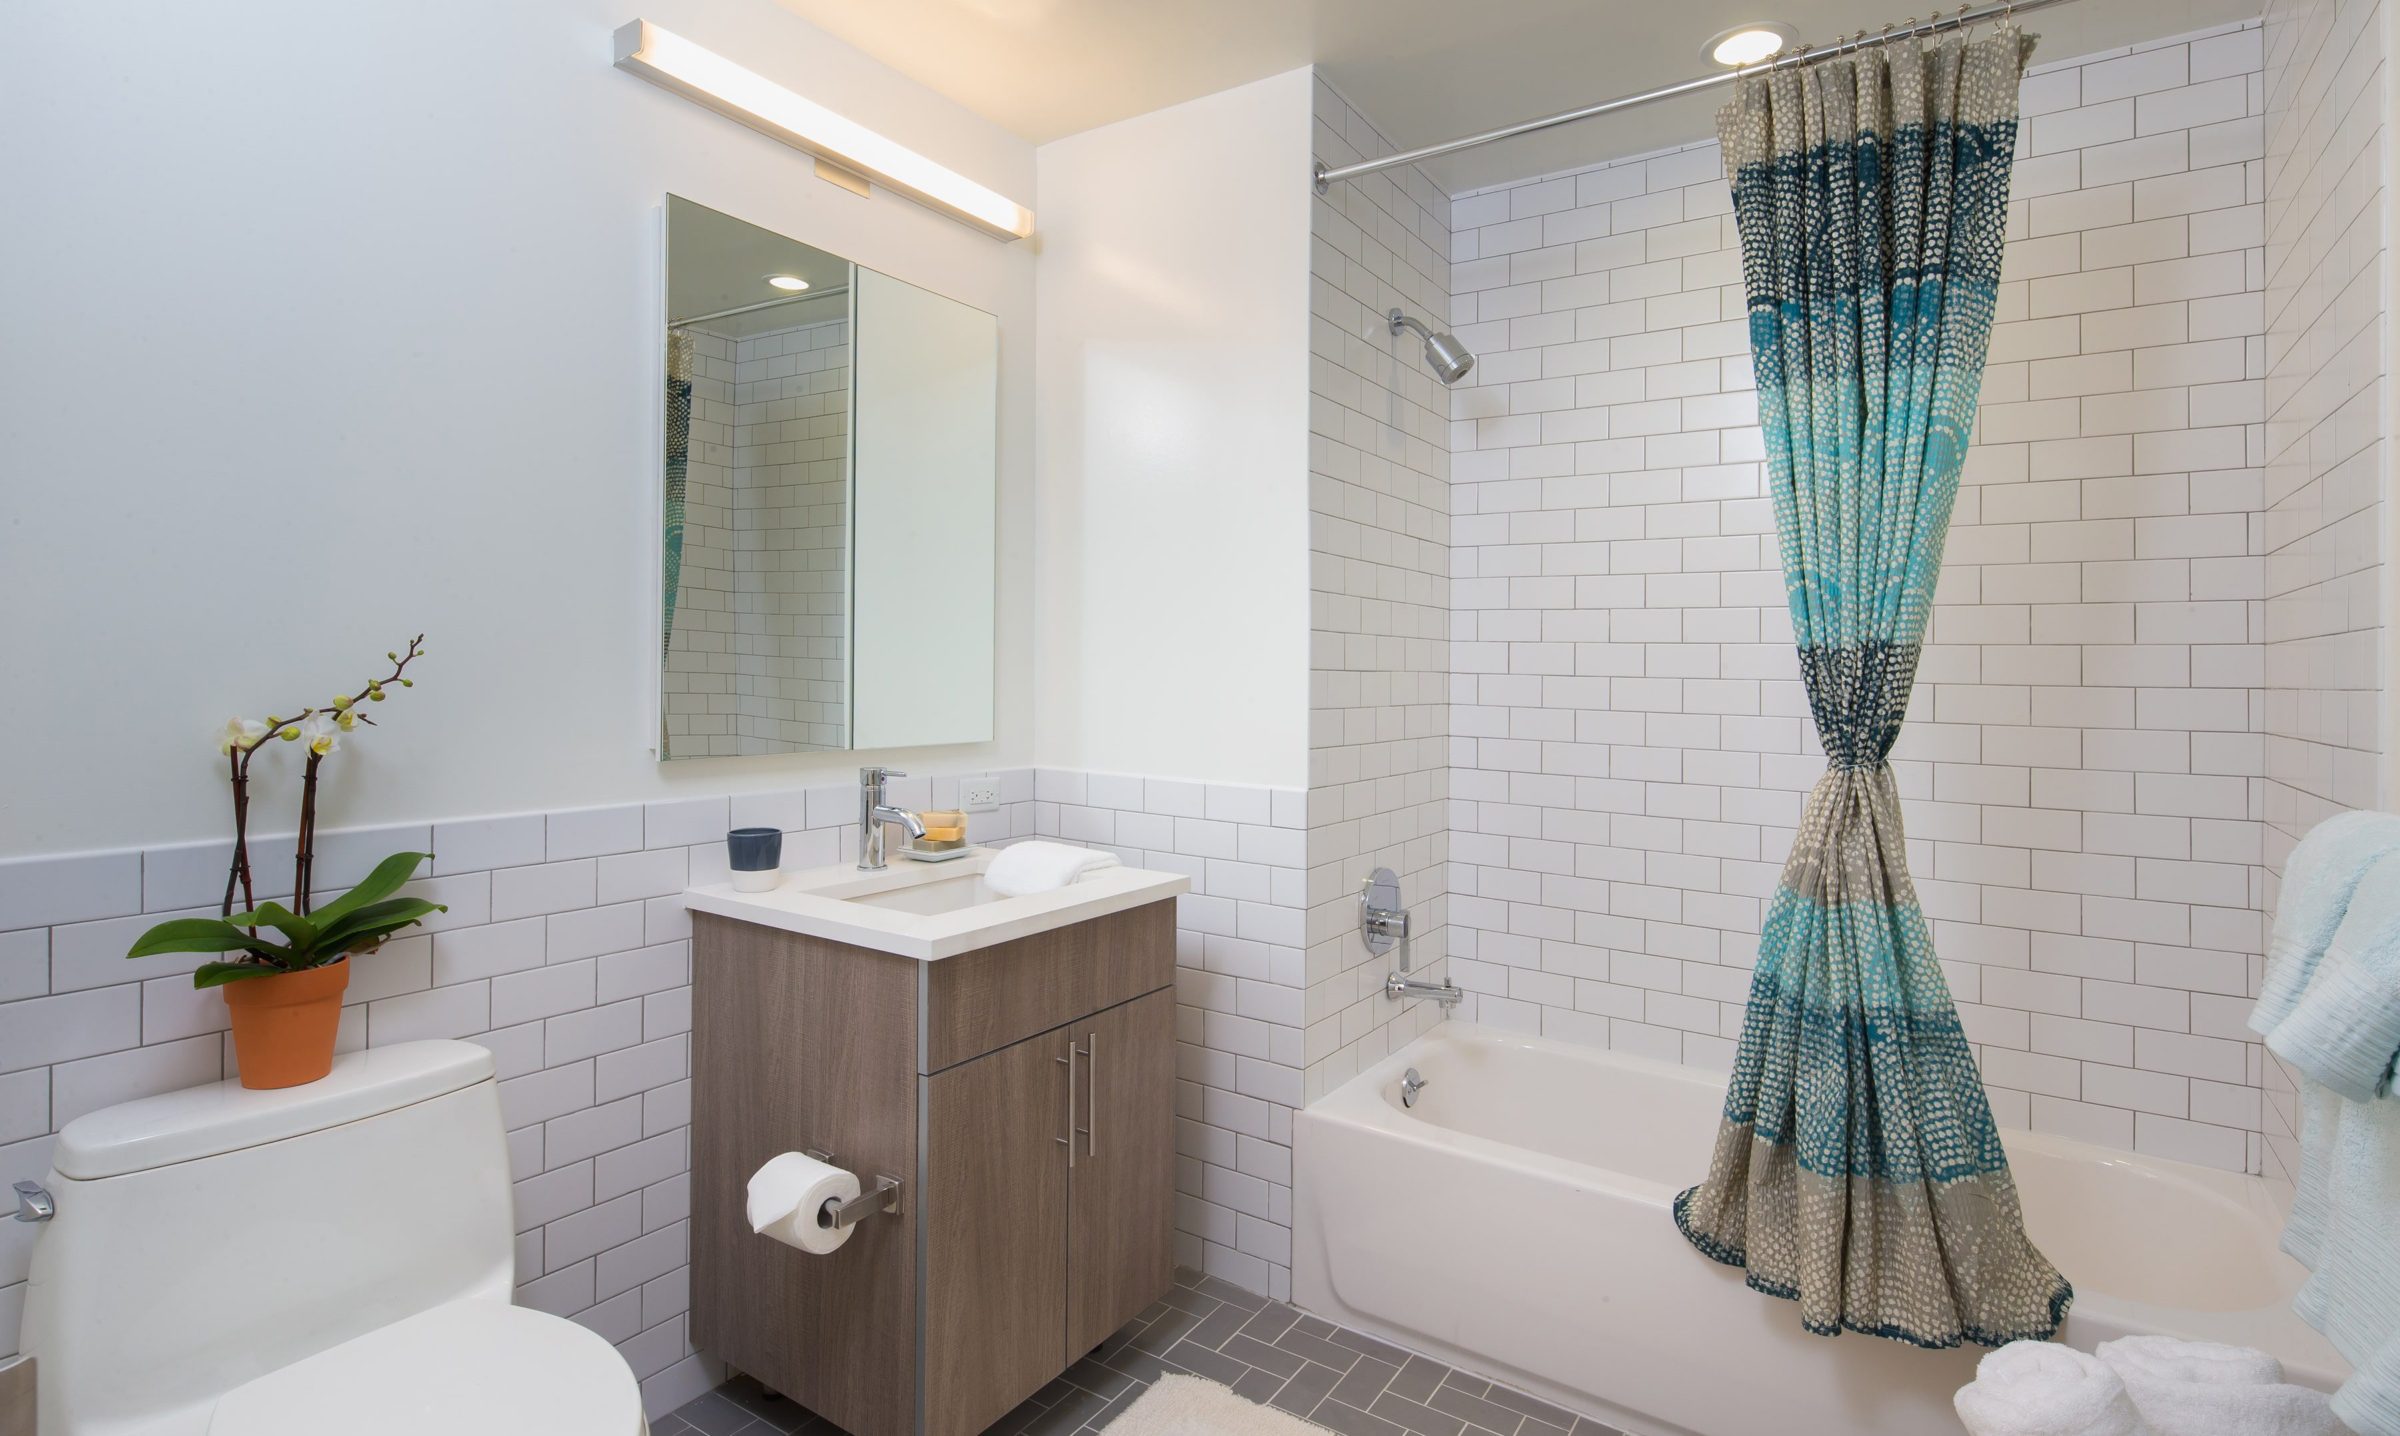 Bathroom with subway tiled shower and walls